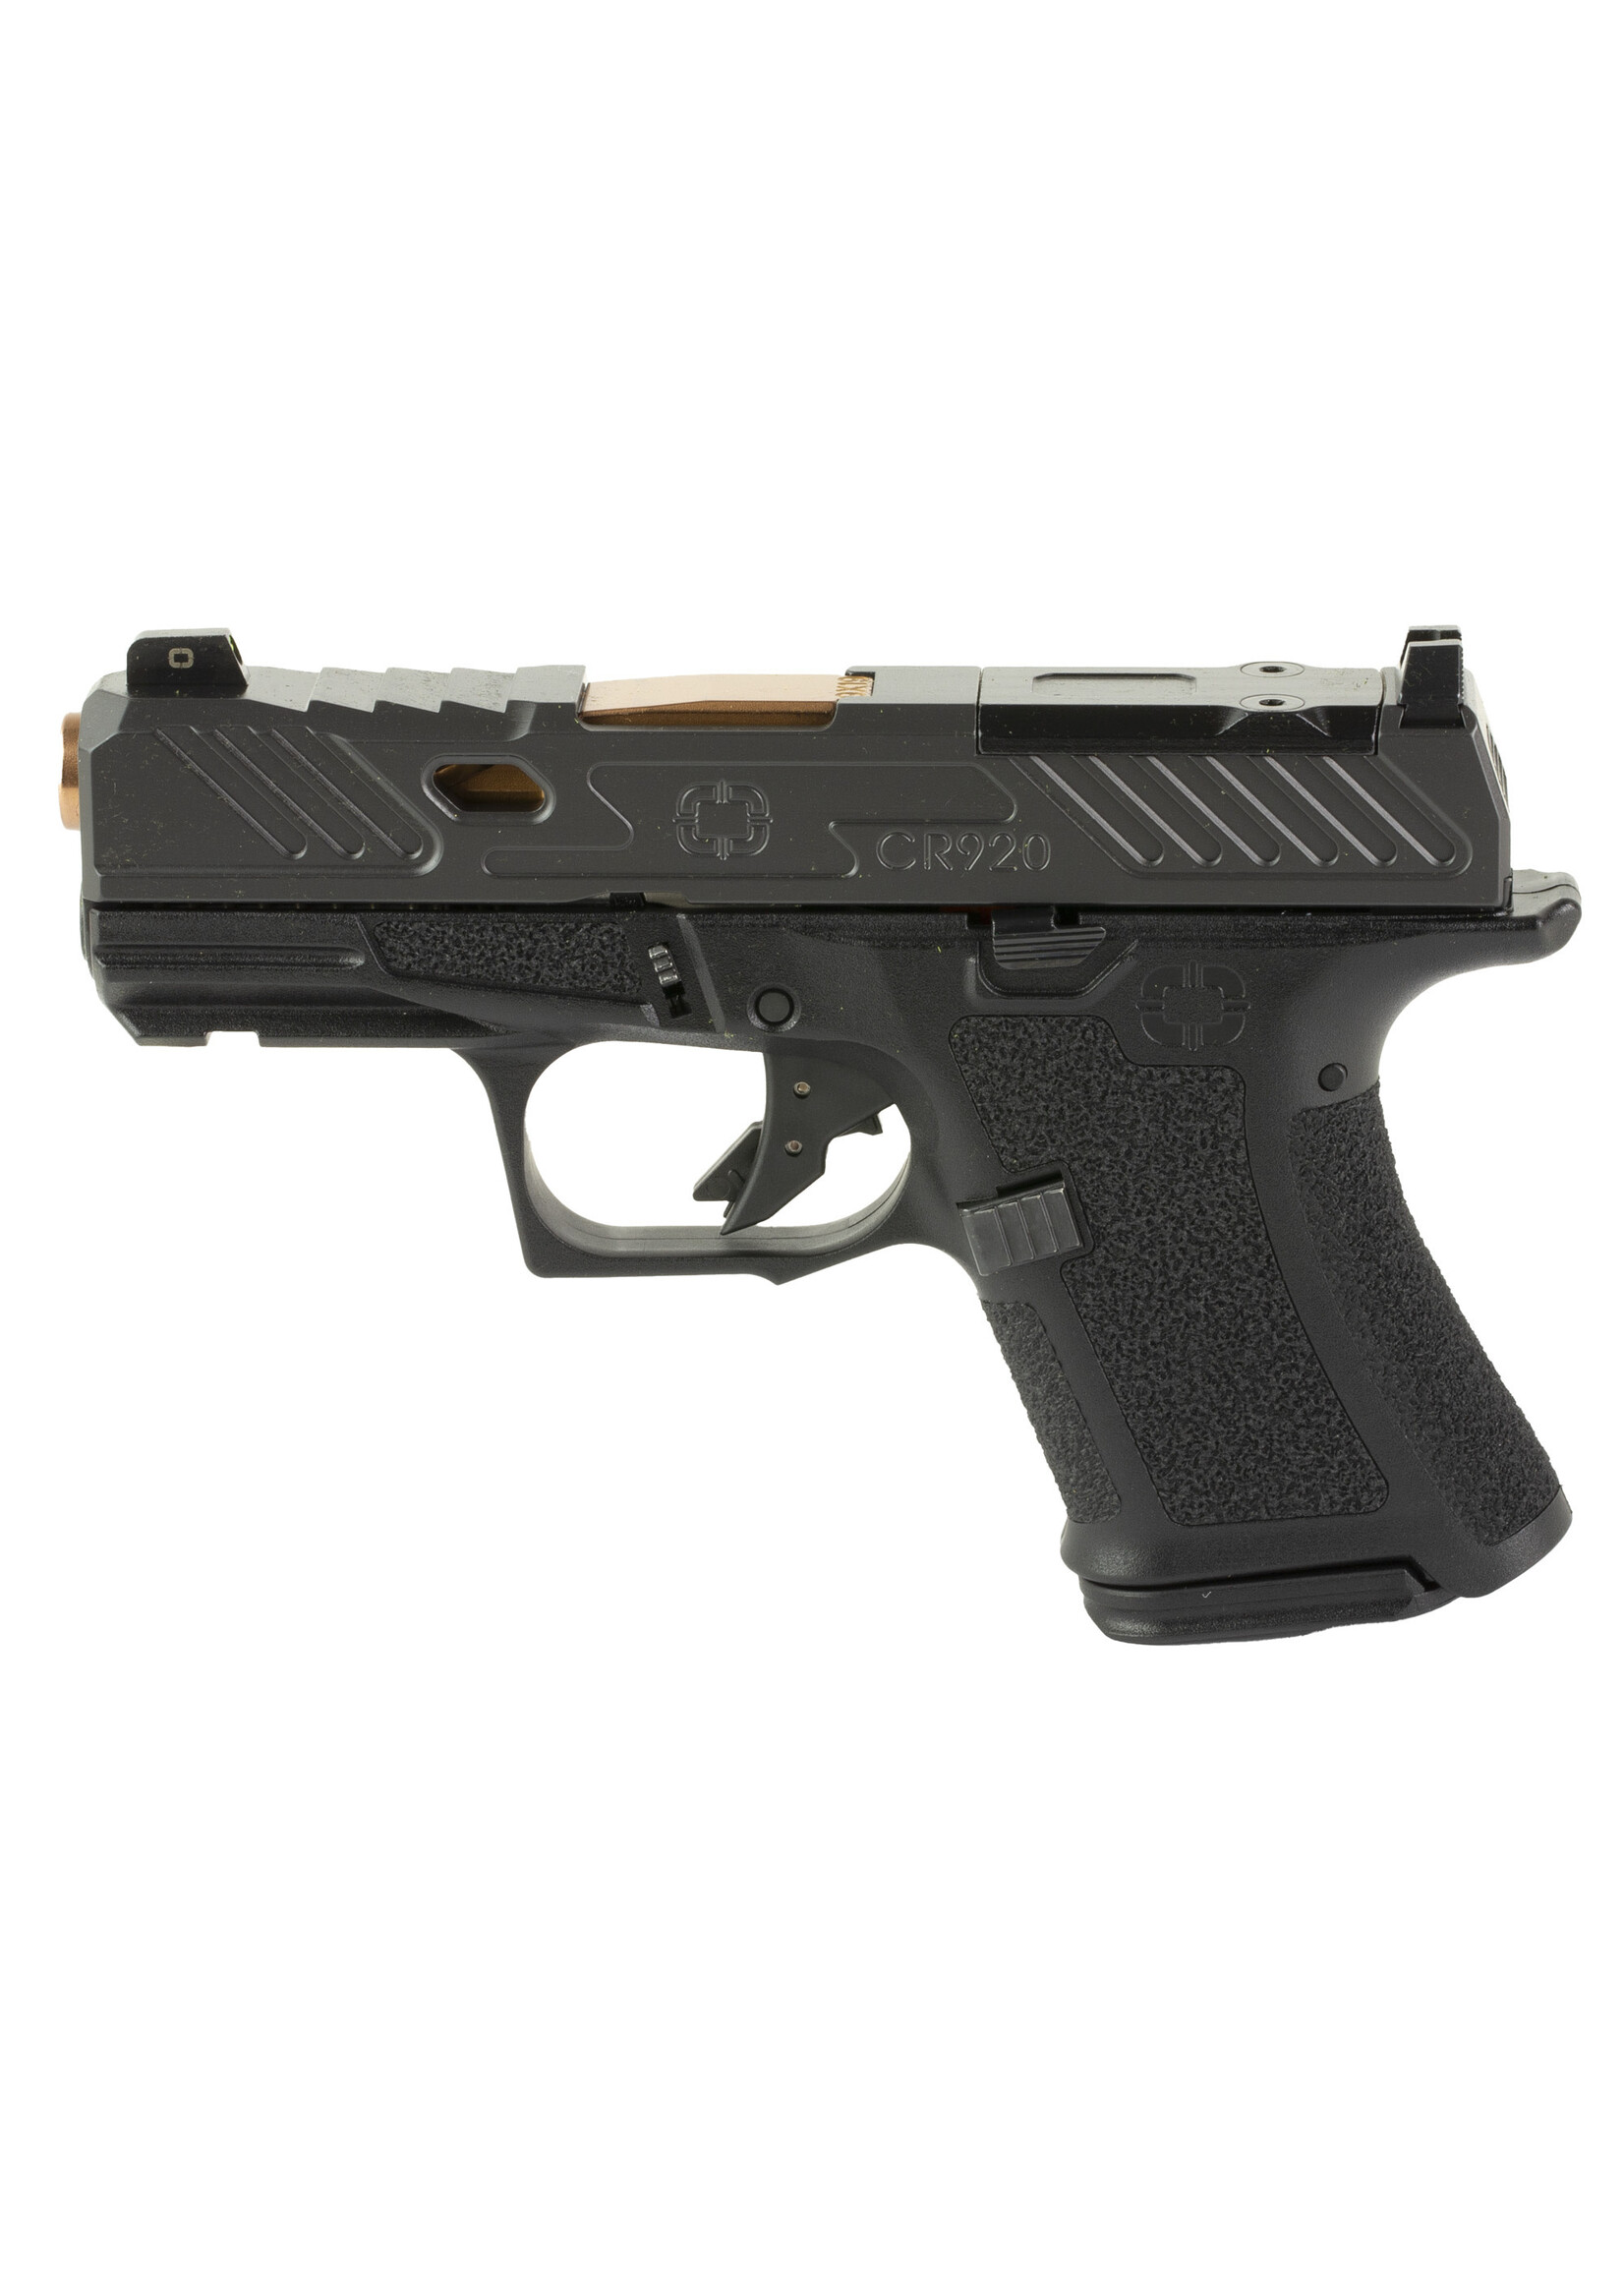 Shadow Systems Shadow Systems, CR920 Elite, Striker Fired, Semi-automatic Pistol, Sub-Compact, 9mm, 3.4" Bronze Spiral Fluted Barrel, Polymer Frame, Nitride Finish, Black, Front Night Sight, Trigger Safety, (1) - 10 Round (1) - 13 Round, Optics Ready, Includes 2 Ma